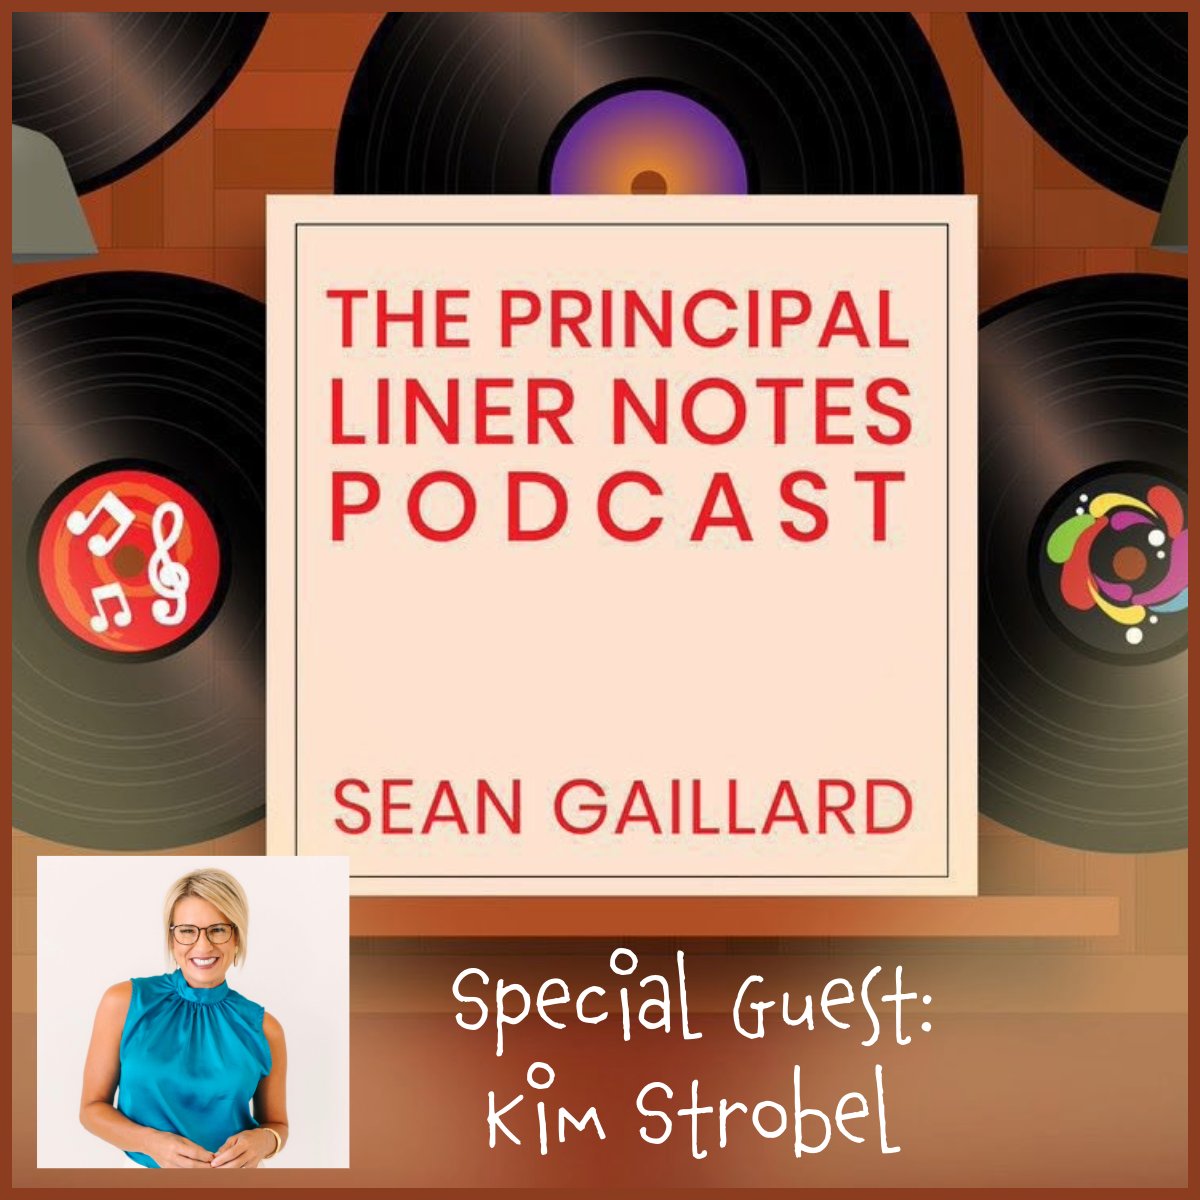 #PrincipalLinerNotes returns with @strobeled! We talk about her new book, #TeachHappy. Join us for a inspiring and connected conversation. Kim empowers others to be their best selves. @LearnwithERG @dbc_inc @bethhill2829 @ToddWhitaker @EvanWhitehead00 @When_You_Wonder @buddyxo